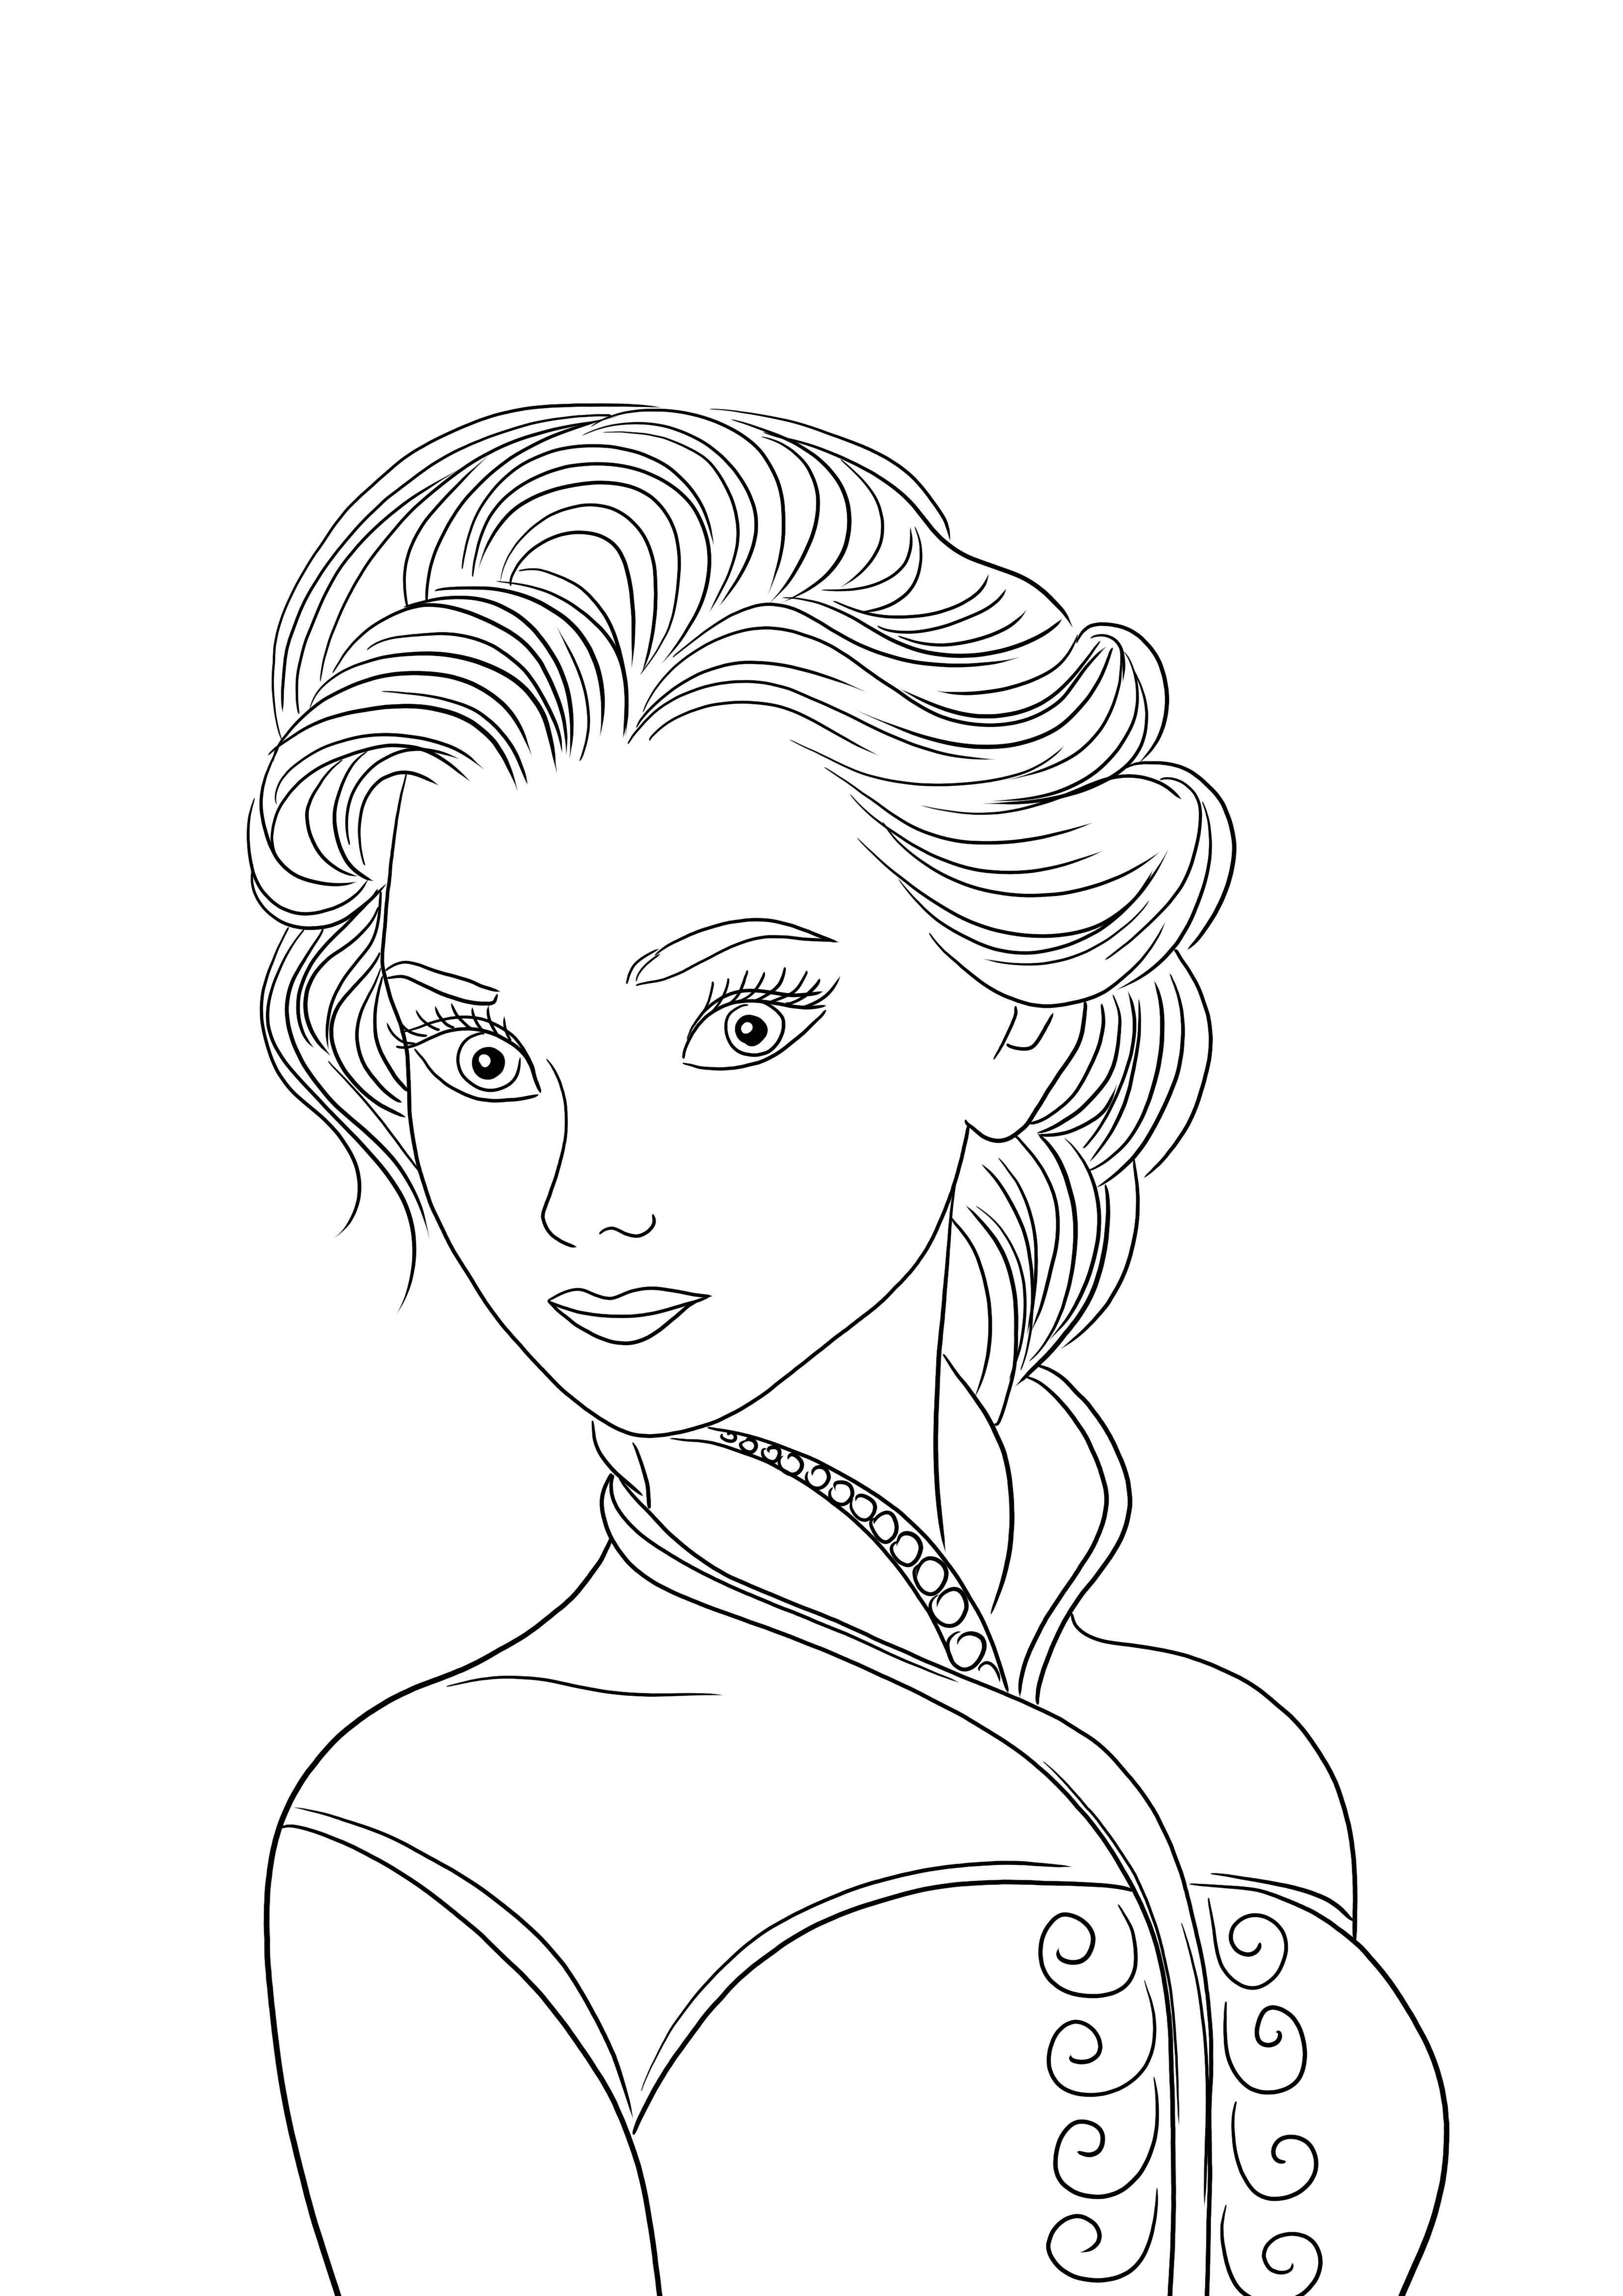 Elsa the Queen ready for free printing and coloring image for kids